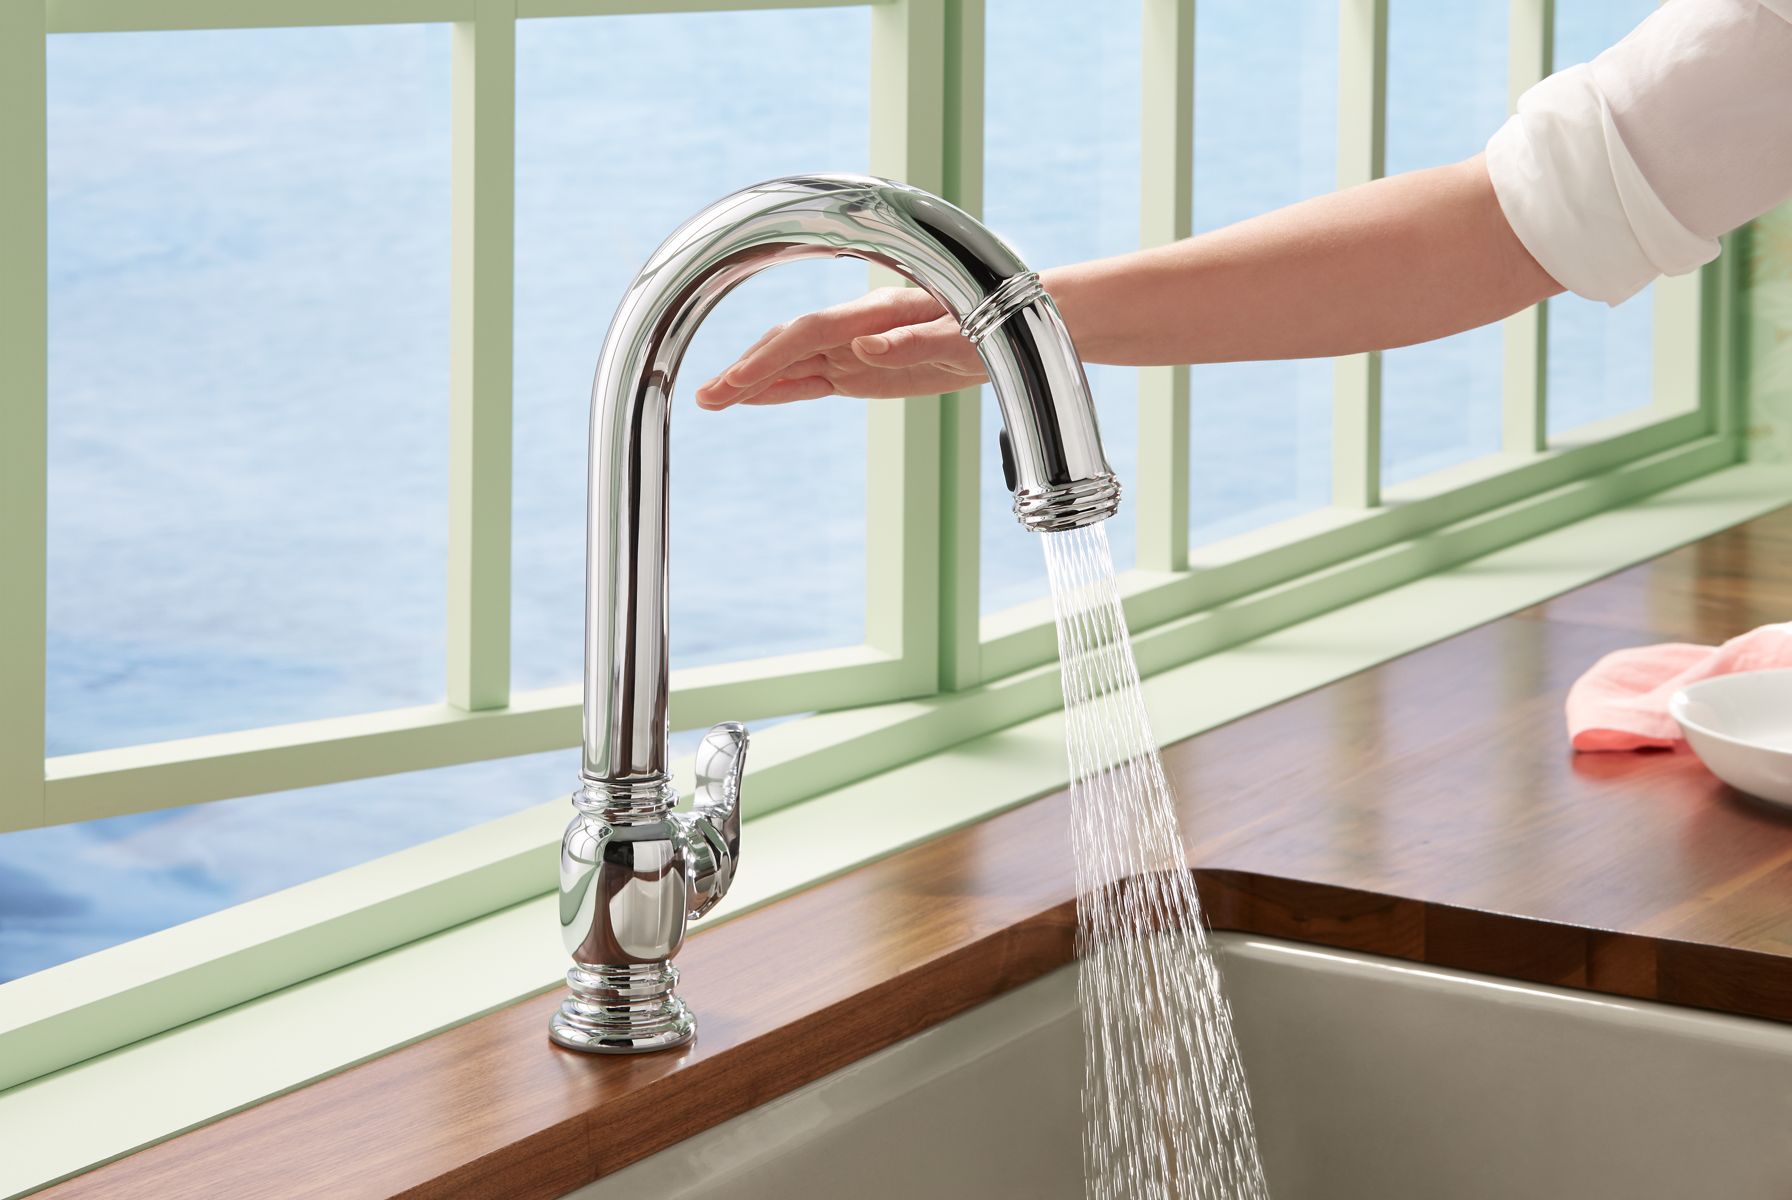  Beckon® Touchless pull-down kitchen sink faucet